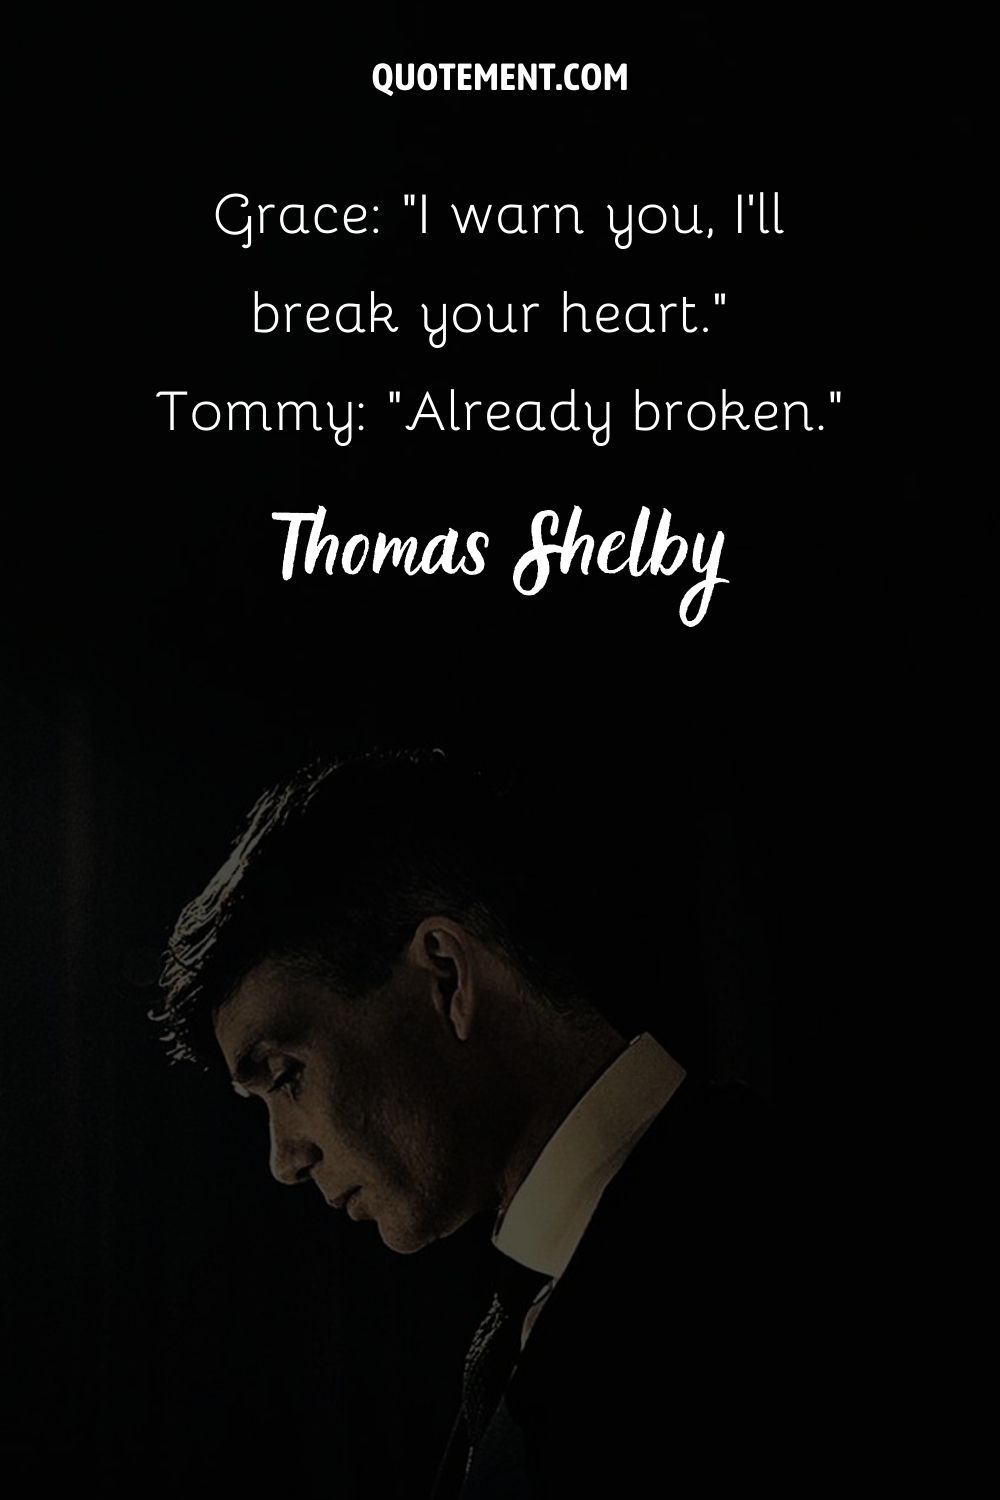 Cillian Murphy looking down representing tommy shelby quote about love
